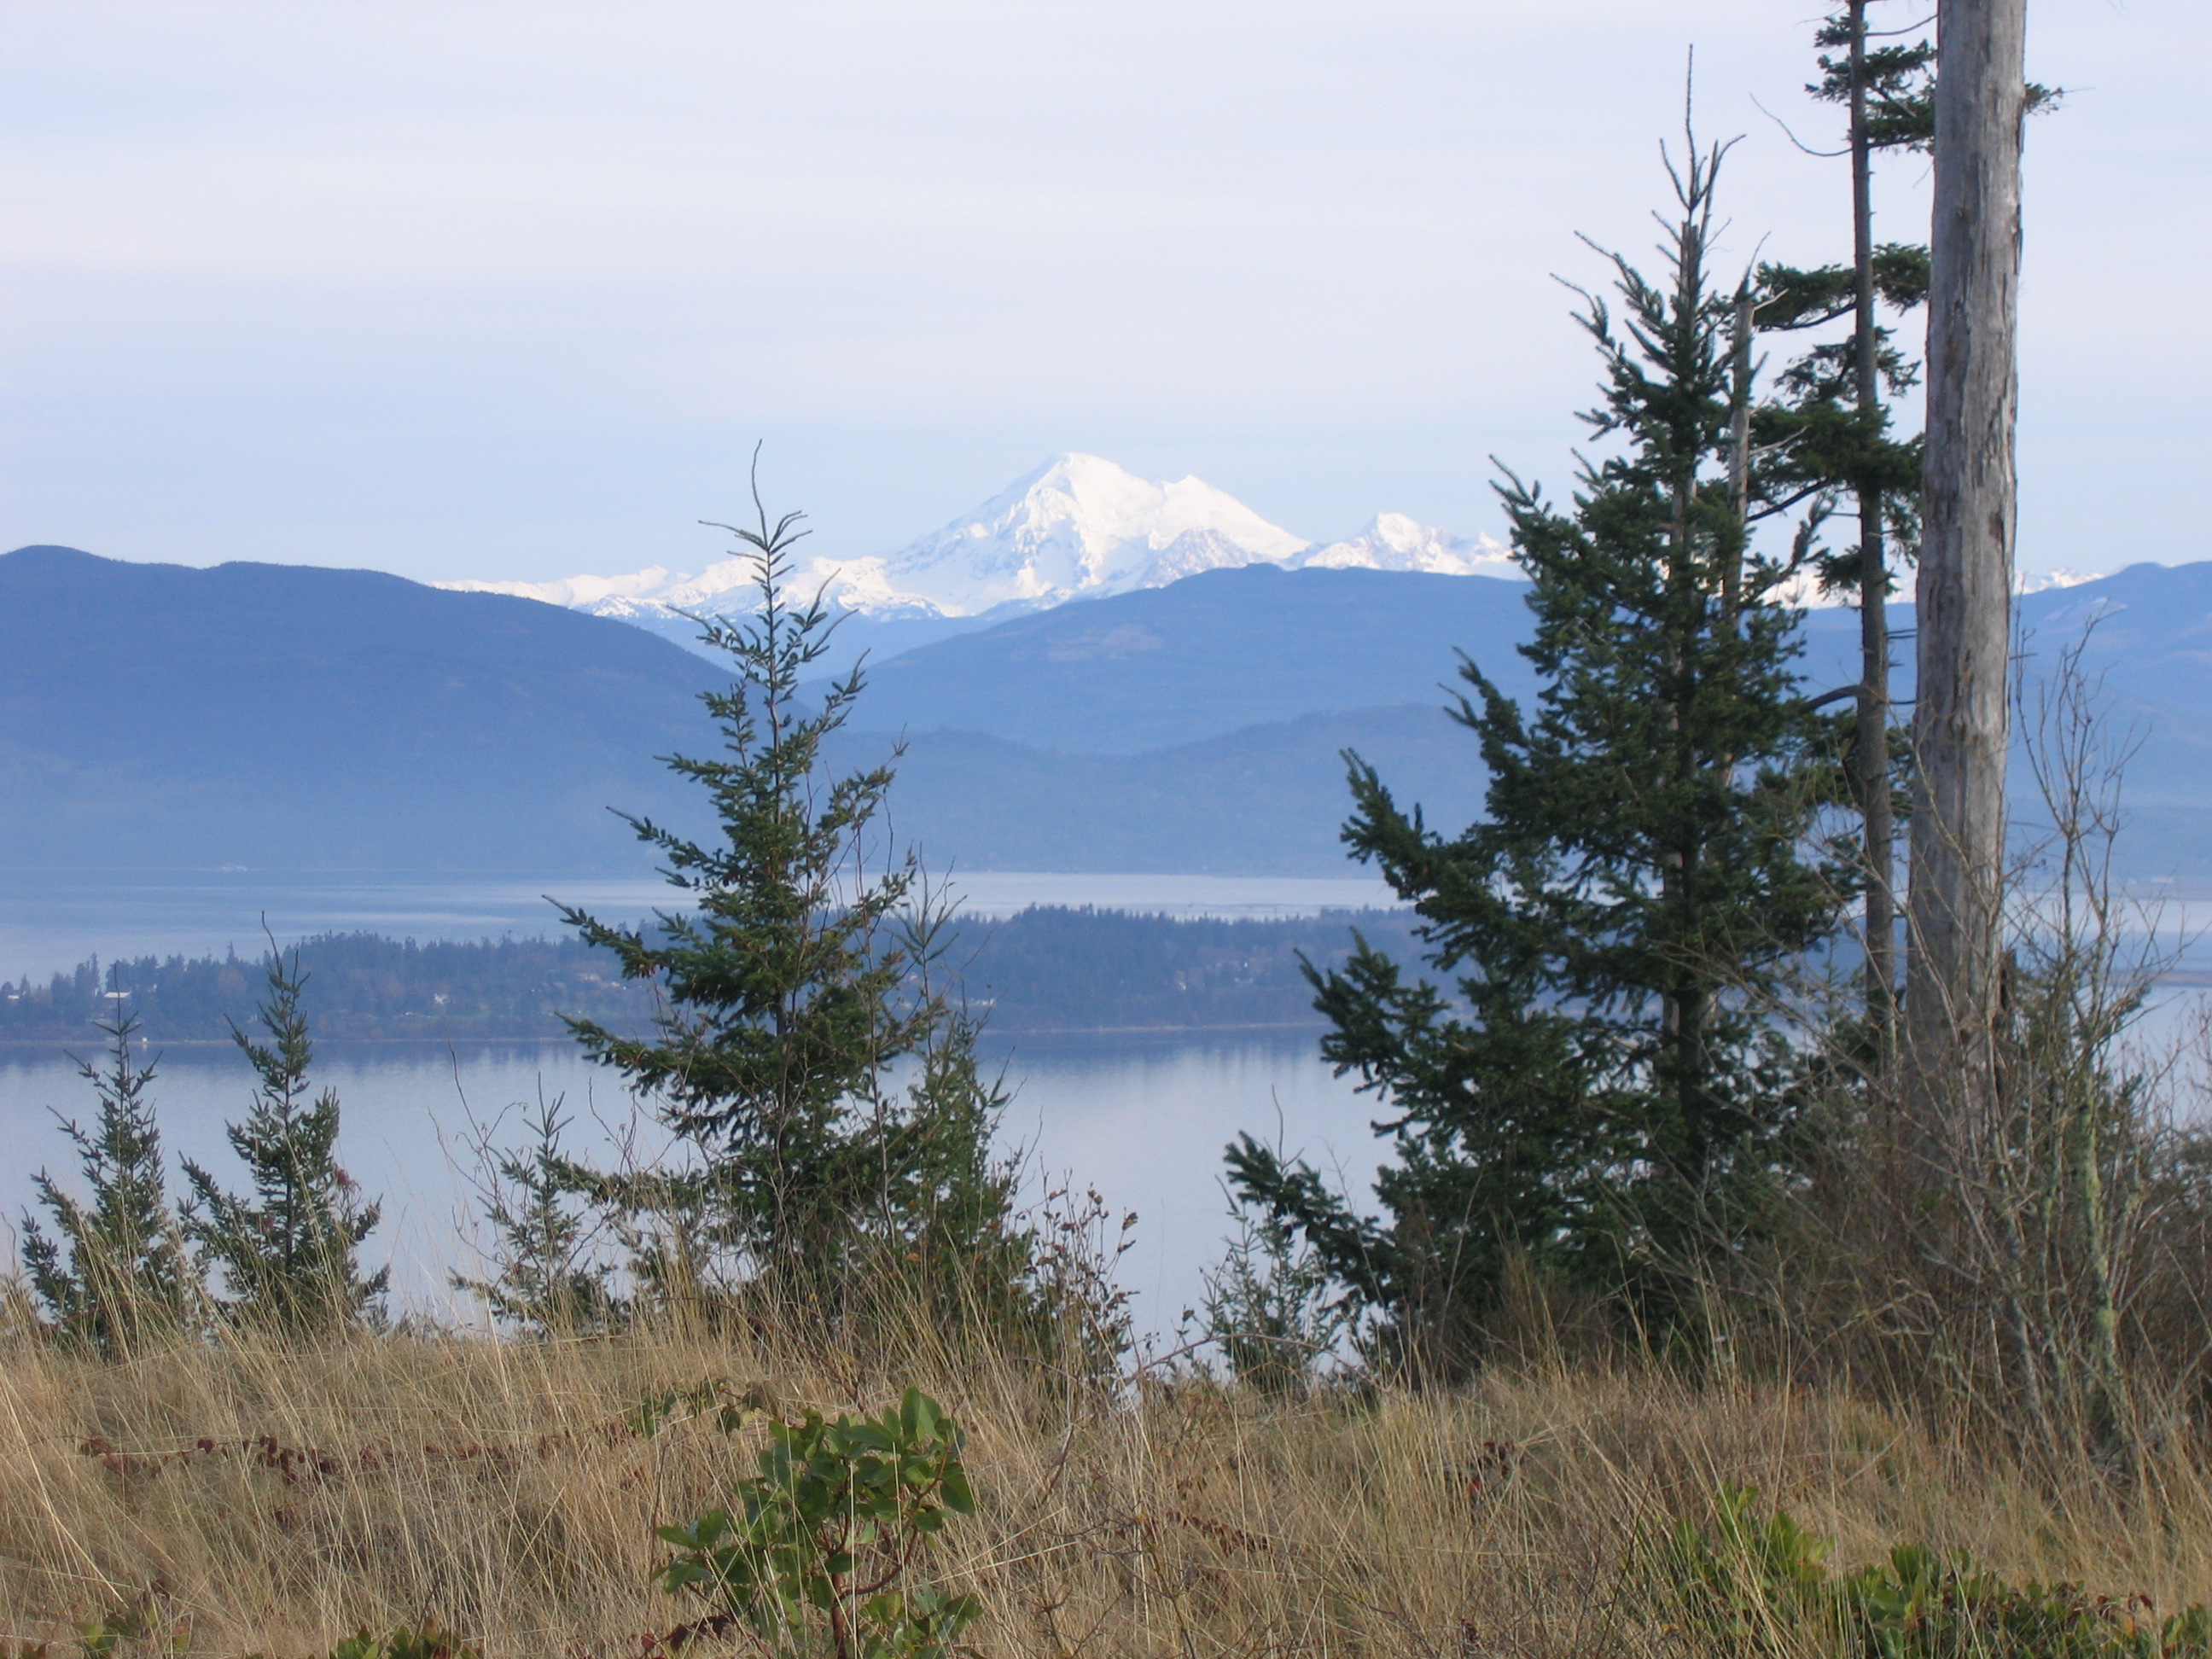 View from the summit of Guemes Mountain of Mount Baker, December 2009. Photograph credit: Skagit Land Trust staff.